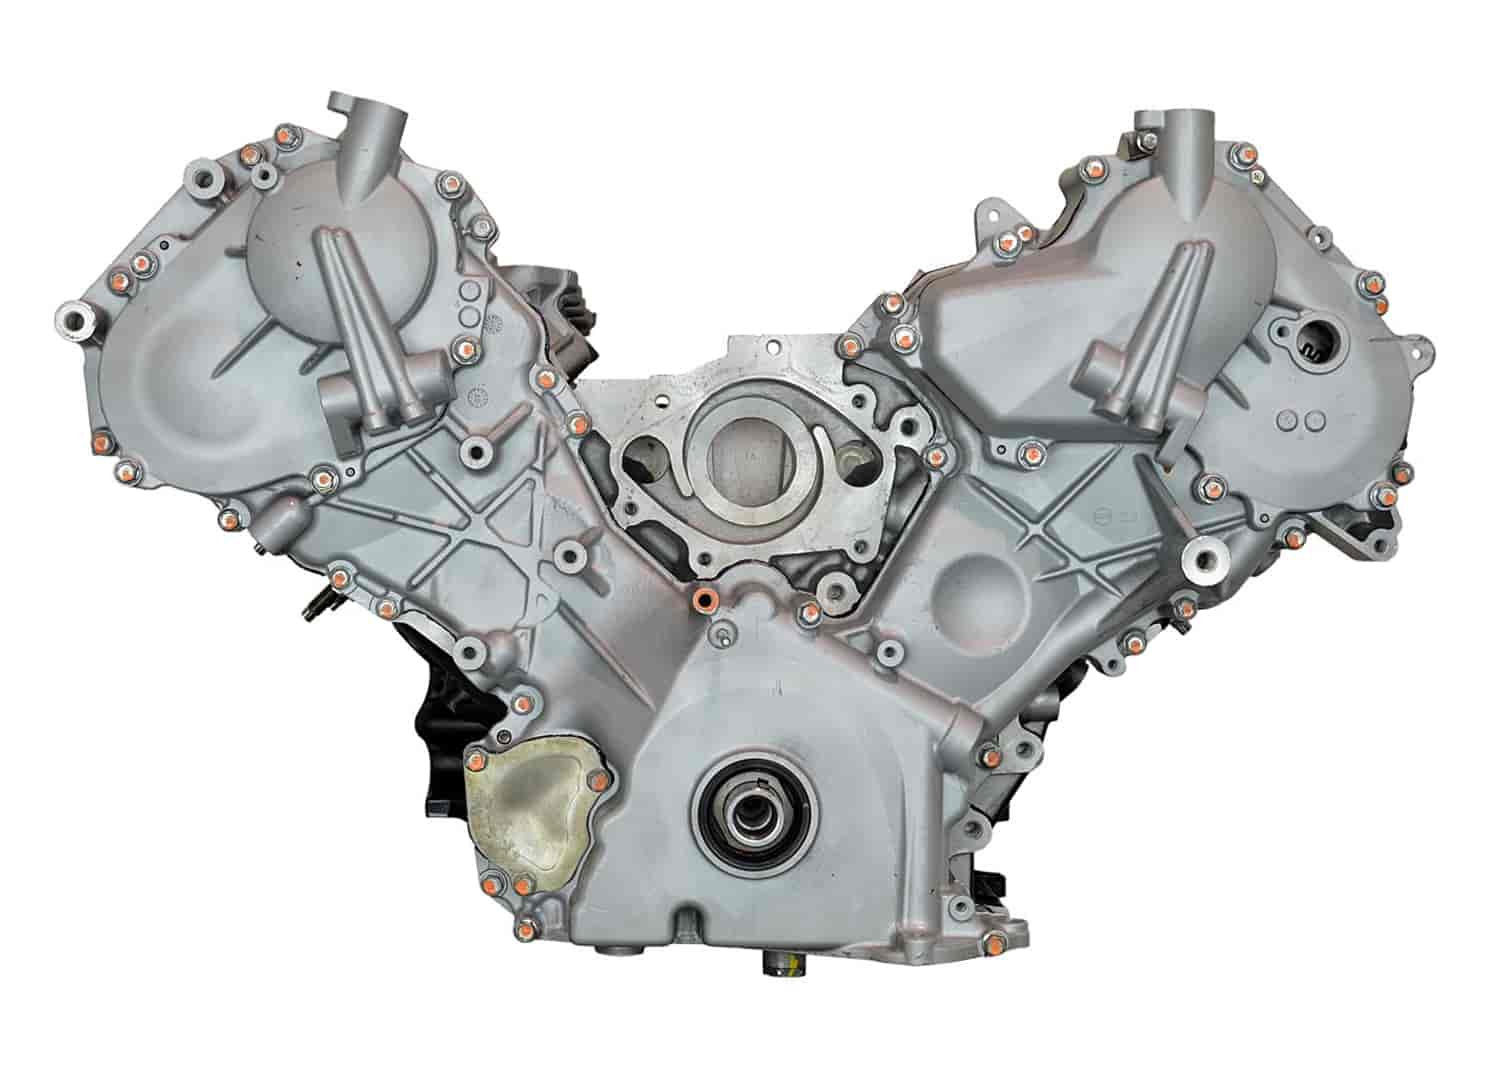 Remanufactured Crate Engine for 2007-2010 Nissan & Infinity